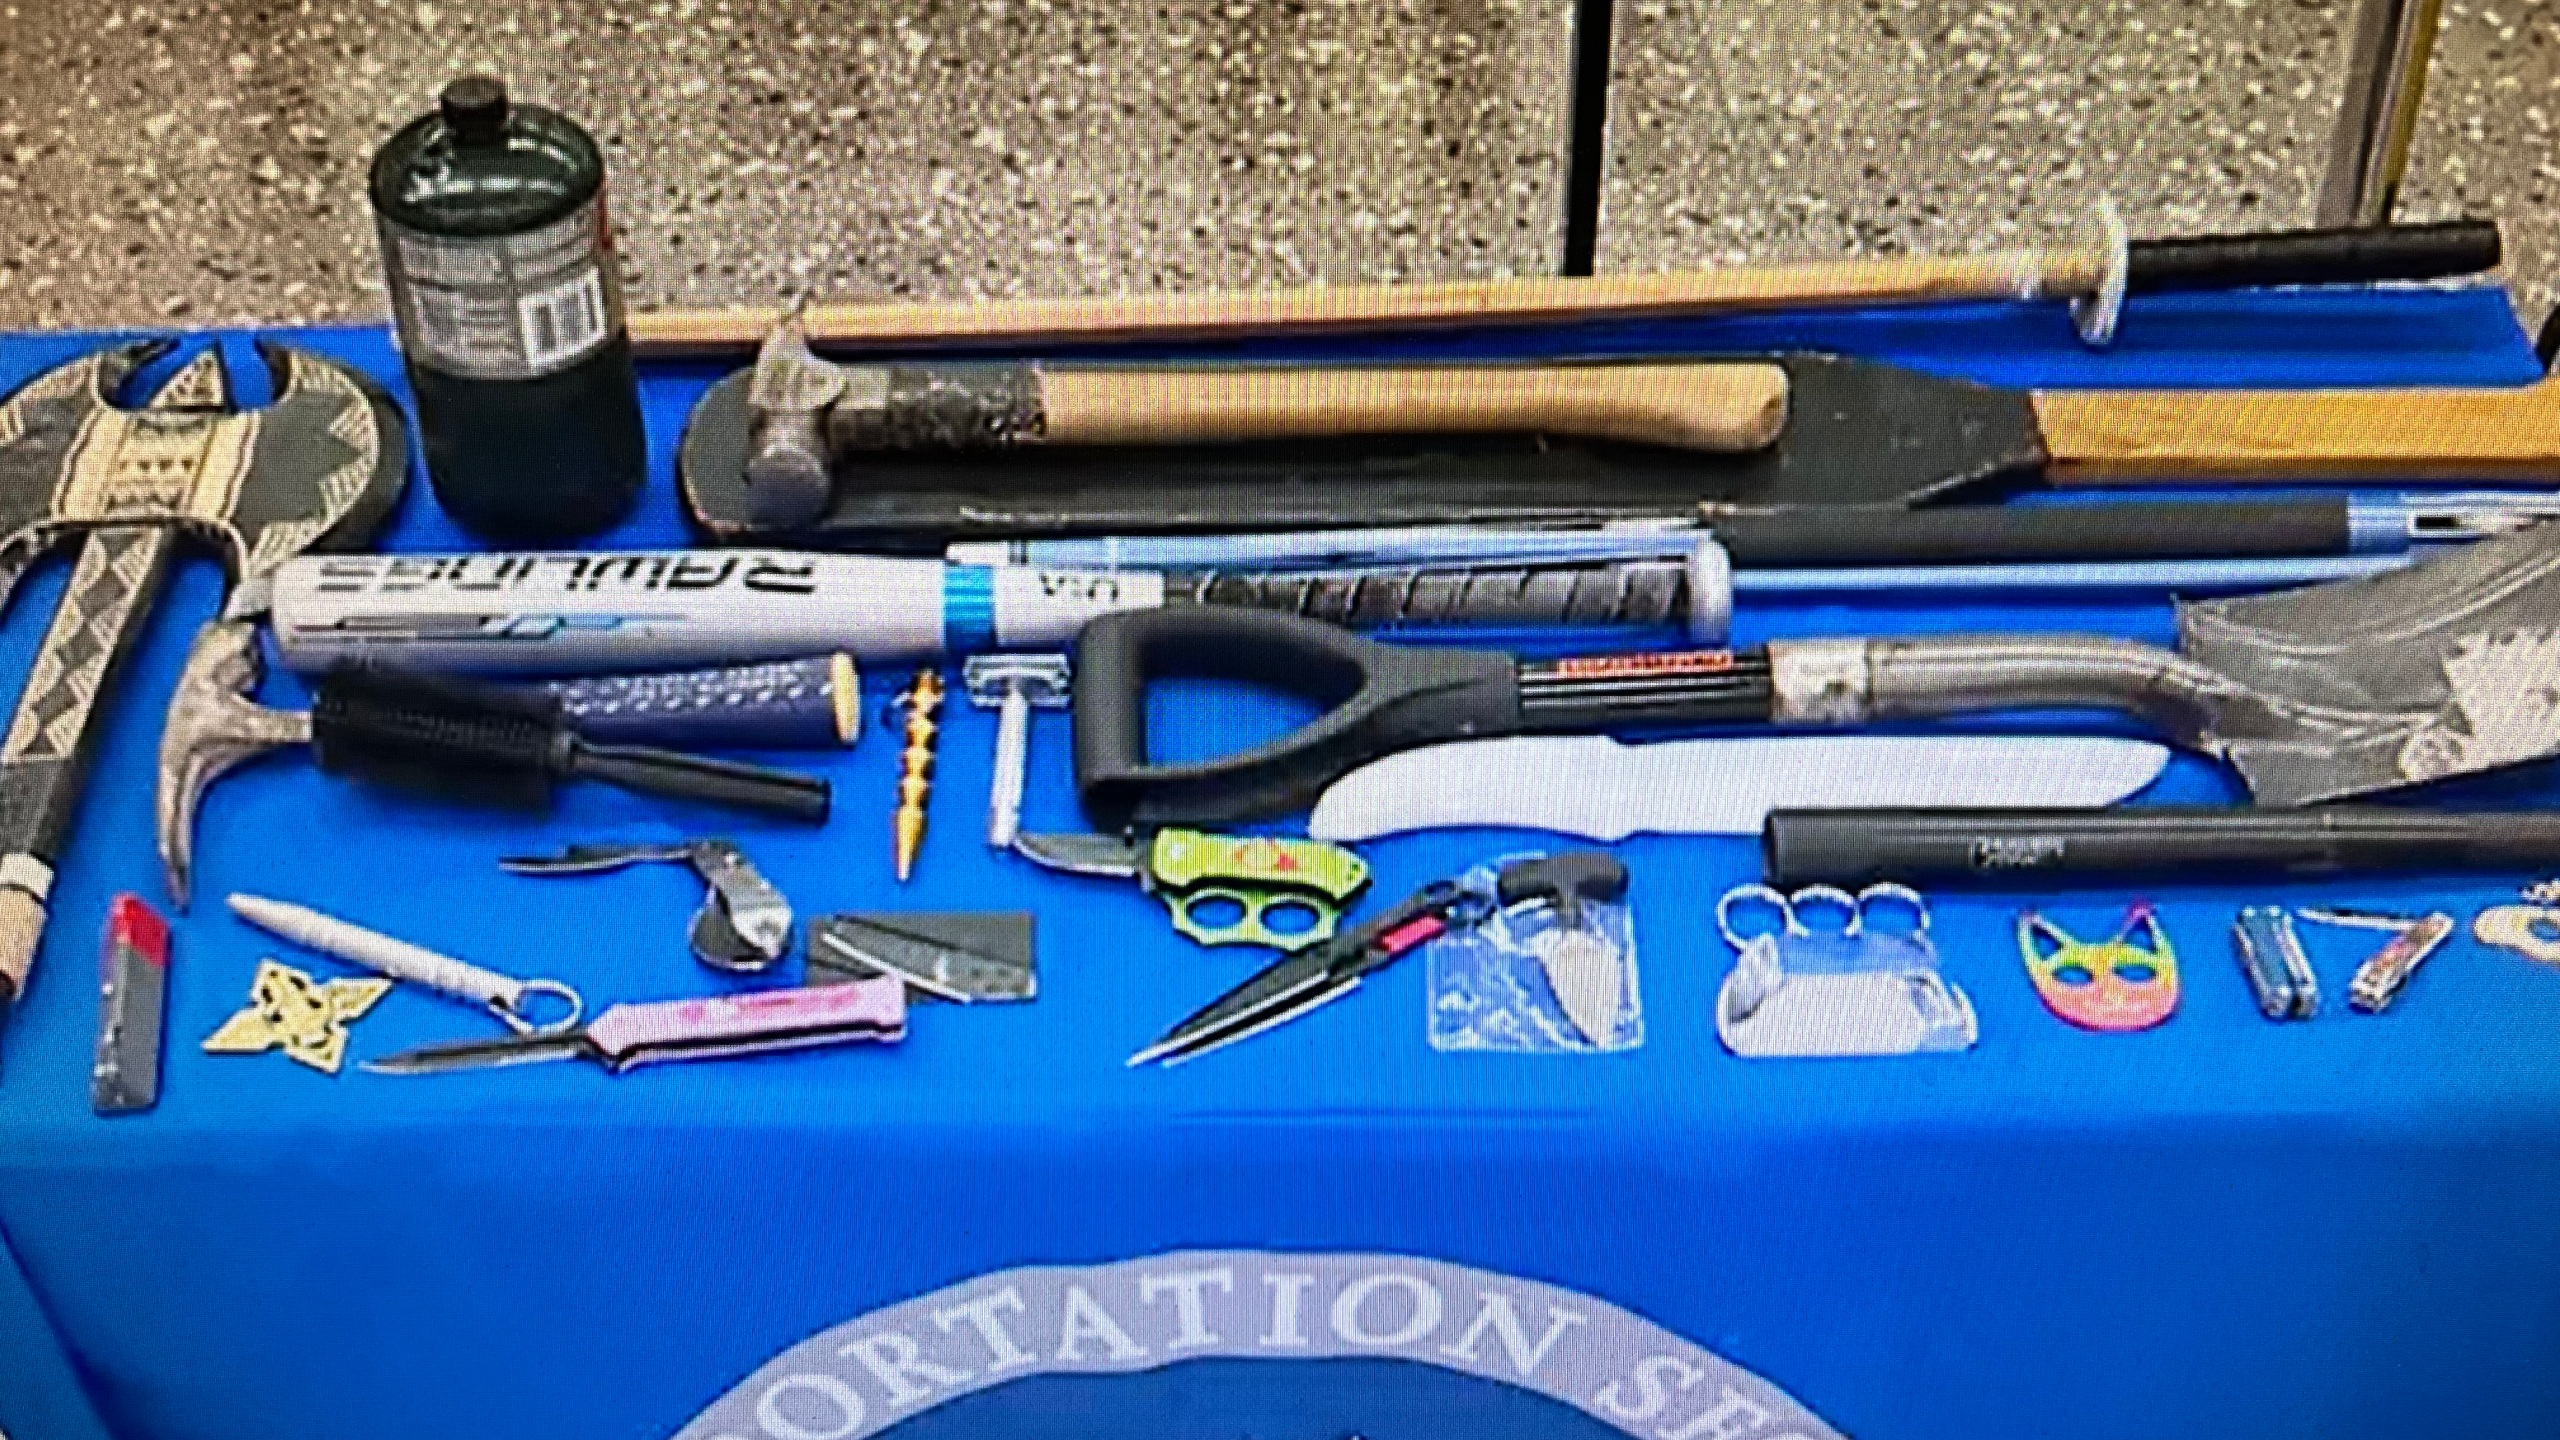 On Thursday, June 1, 2023, a photo shows confiscated items from TSA checkpoints at Daniel K. Inouye International Airport in Honolulu, Hawaiʻi.